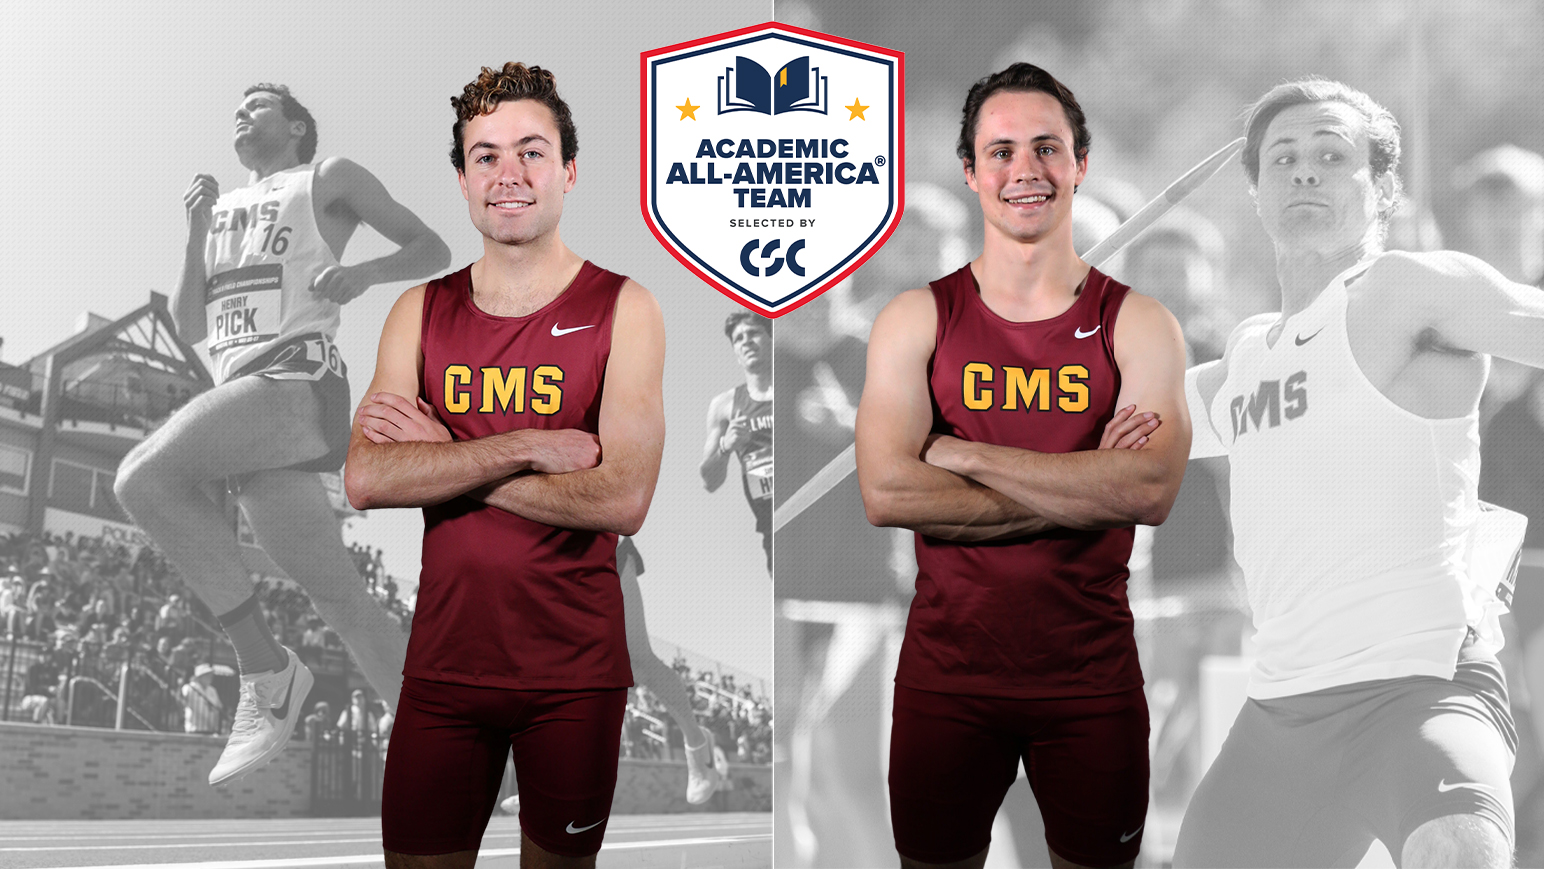 Henry Pick (l) and Truman Knowles (r) earned Academic All-America distinction